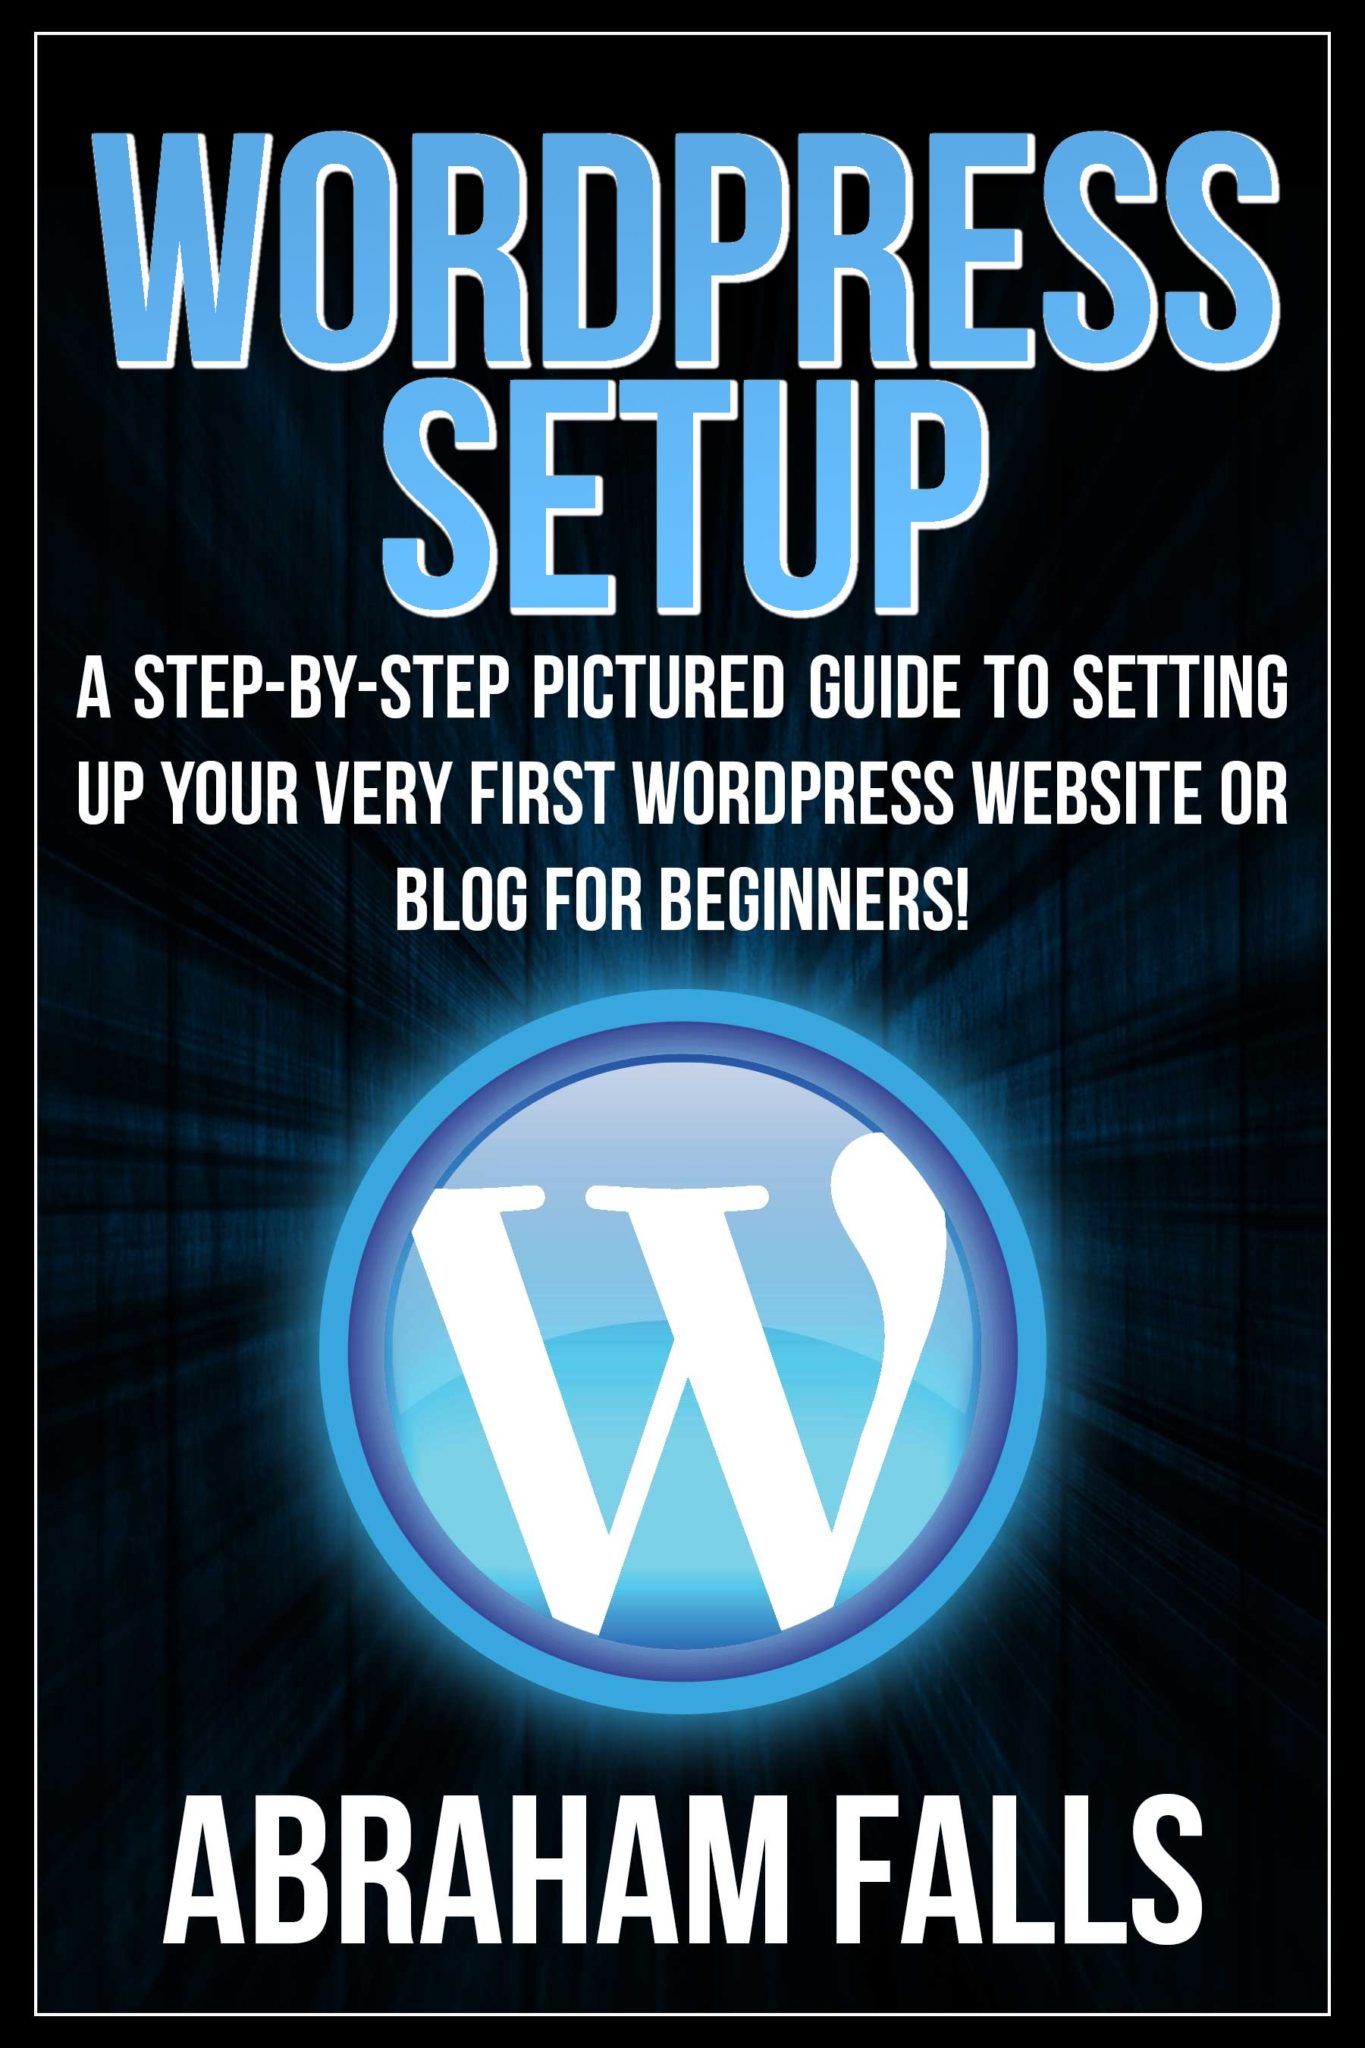 WordPress: Setup – A Step-by-Step Pictured Guide To Setting Up Your Very First WordPress Website or Blog – For Beginners! by Abraham Falls